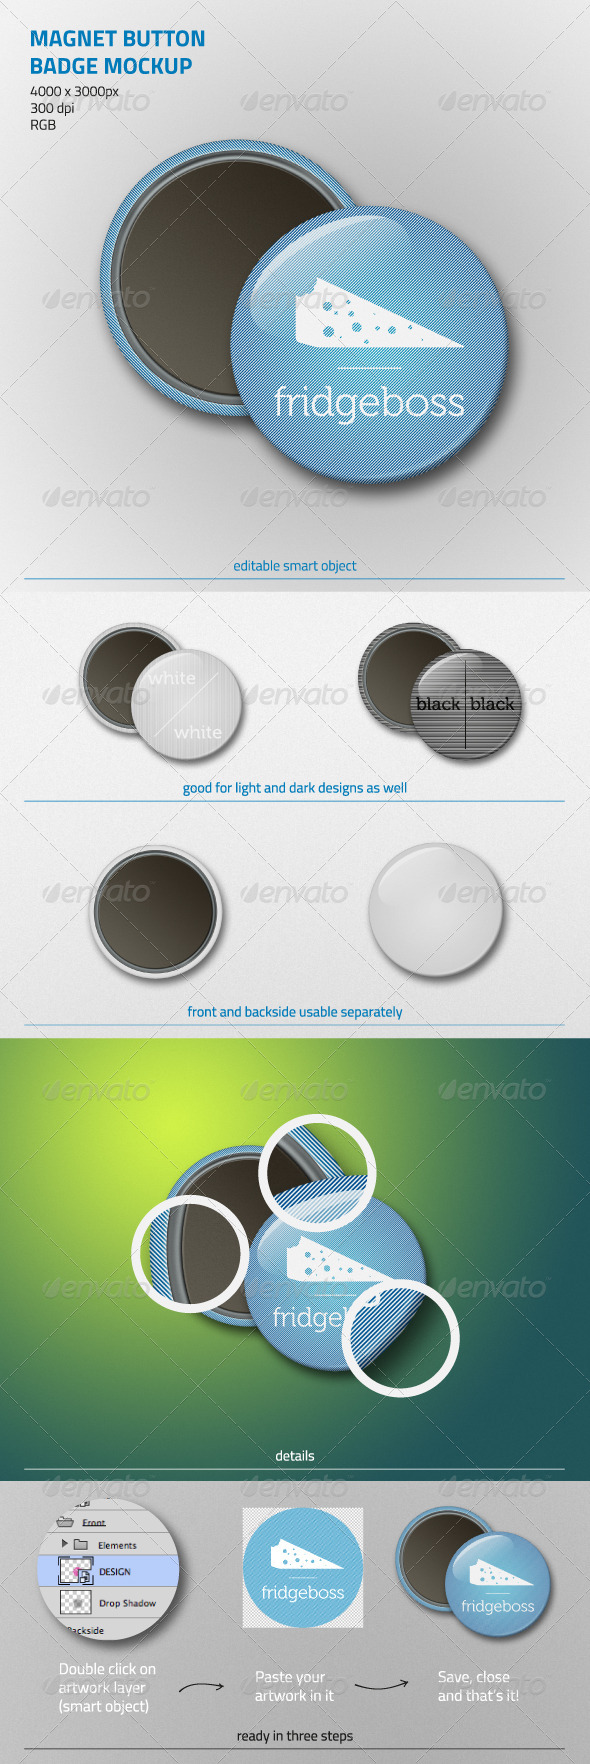 Download Magnet Mockup Graphics Designs Templates From Graphicriver